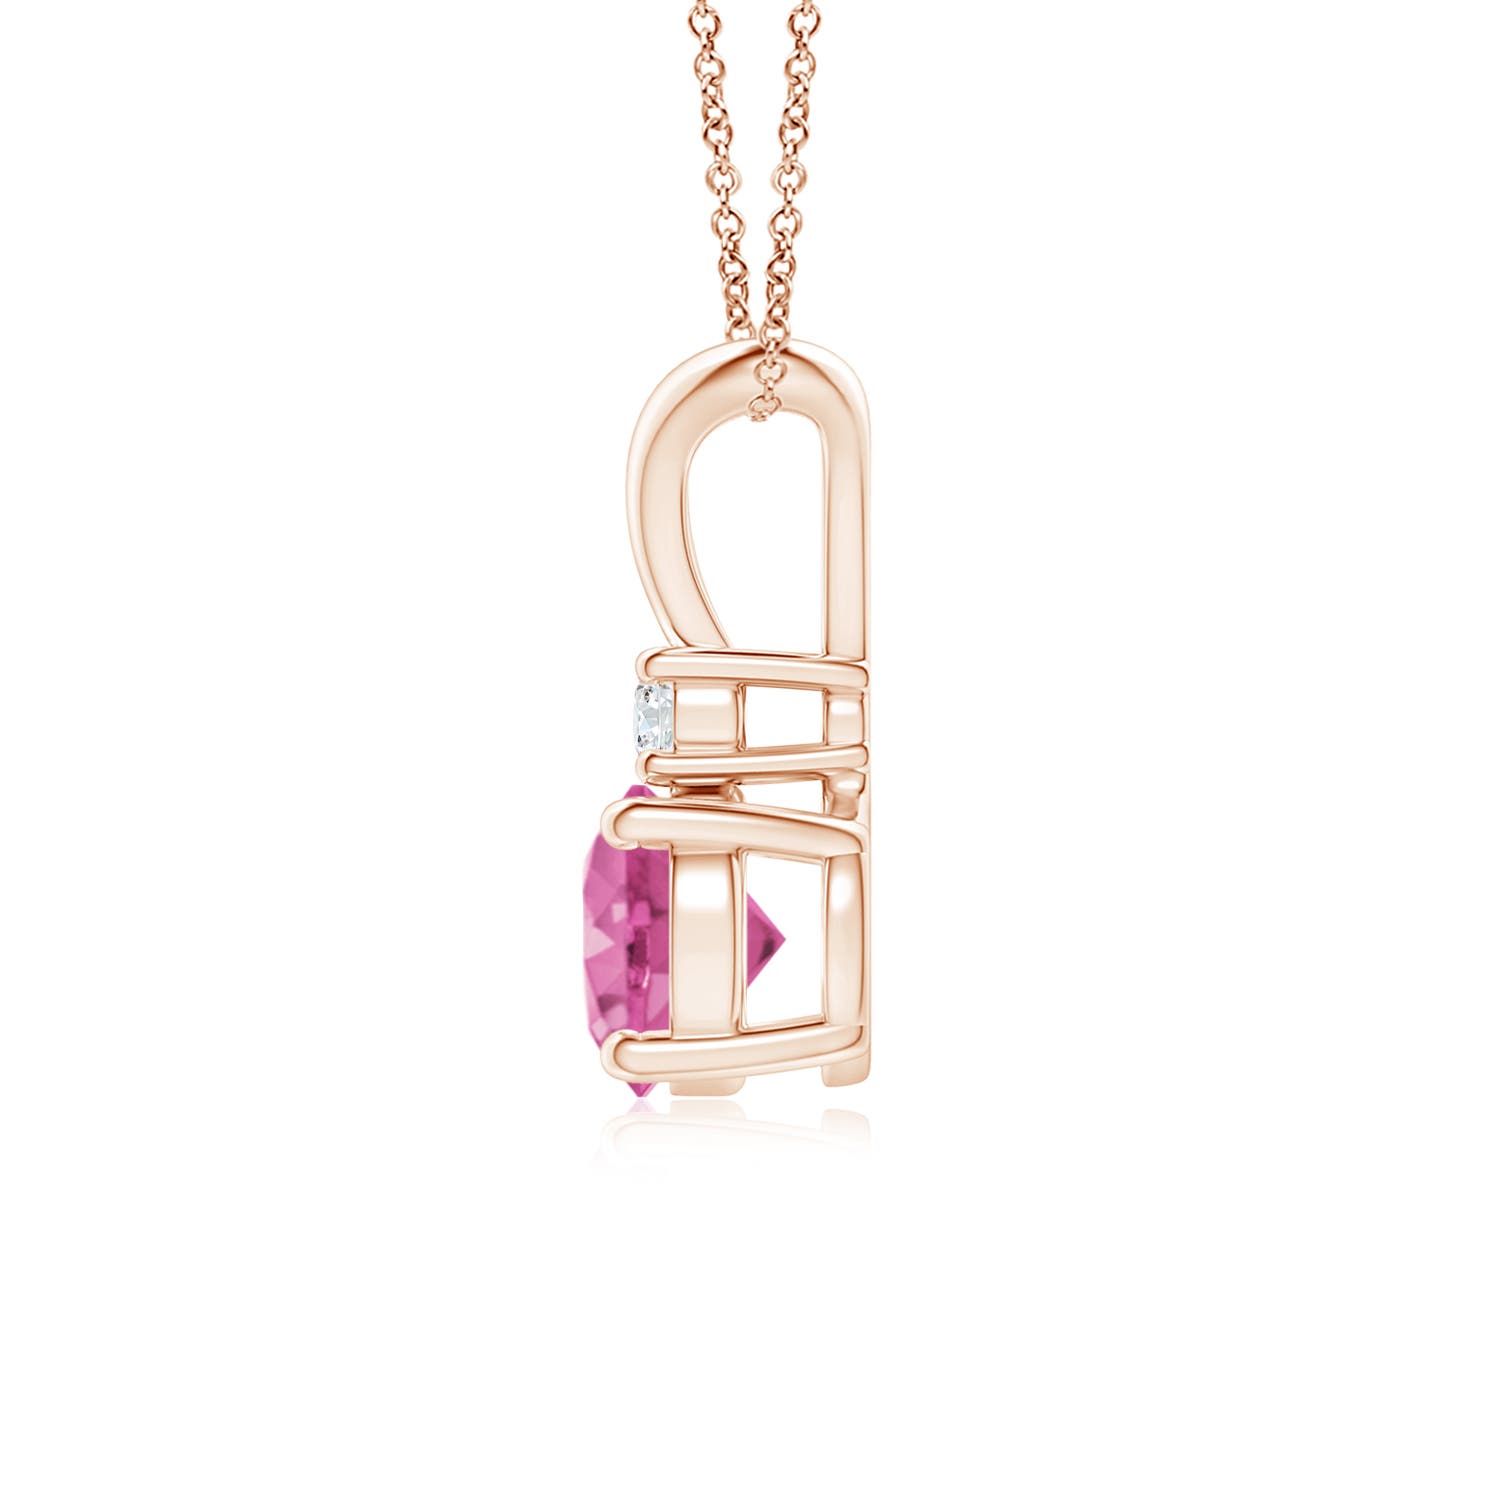 AAA - Pink Sapphire / 1.04 CT / 14 KT Rose Gold